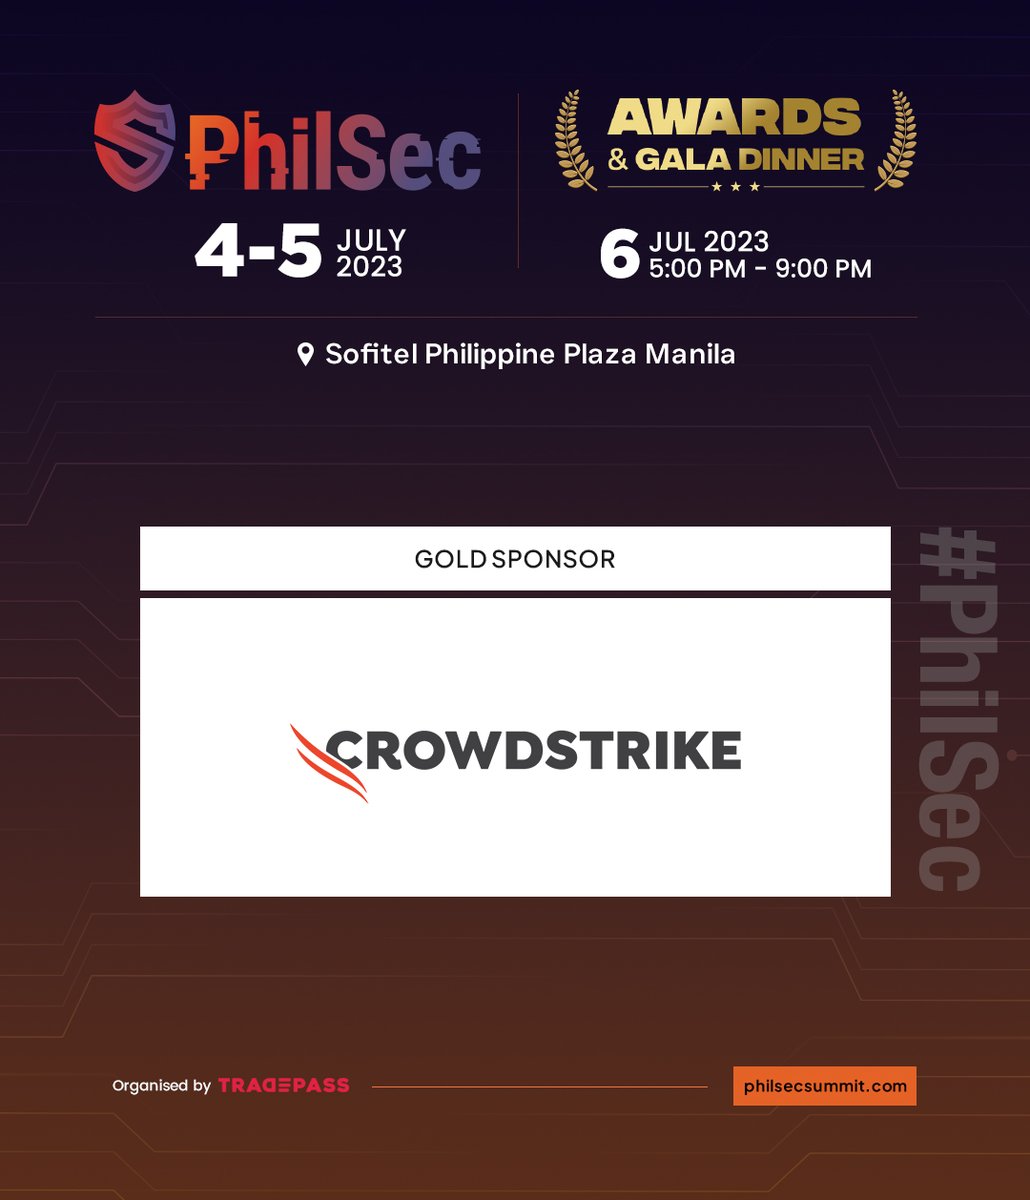 Announcing @CrowdStrike as a Gold Sponsor for PhilSec 2023!.

To know more about their solutions, register now: hubs.la/Q01VdQh00

#PhilSec2023 #PhilSec #philippines #manila #sofitel #cybersecuritysolutions #cybersecurity #cyberdefence #networksecurity #tradepass